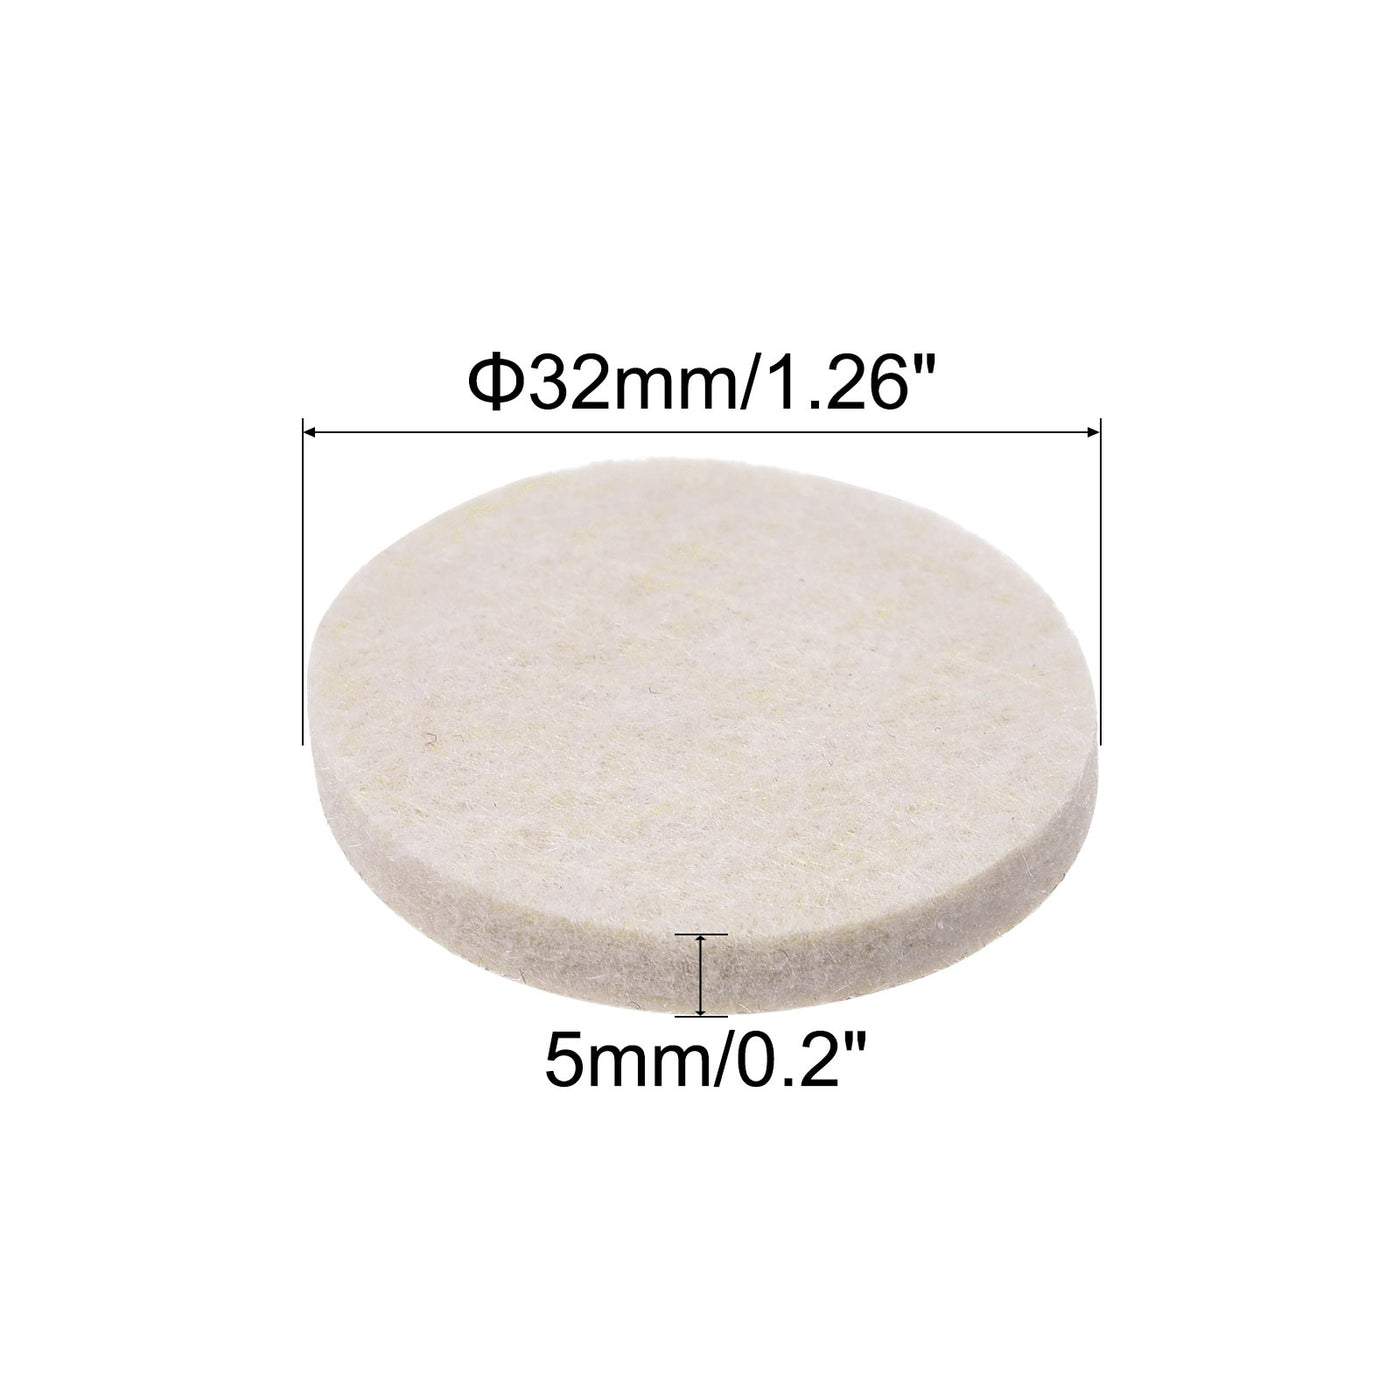 uxcell Uxcell Felt Furniture Pads, Self-stick Non-slip Anti-scratch Round Felt Pads for Table Tops